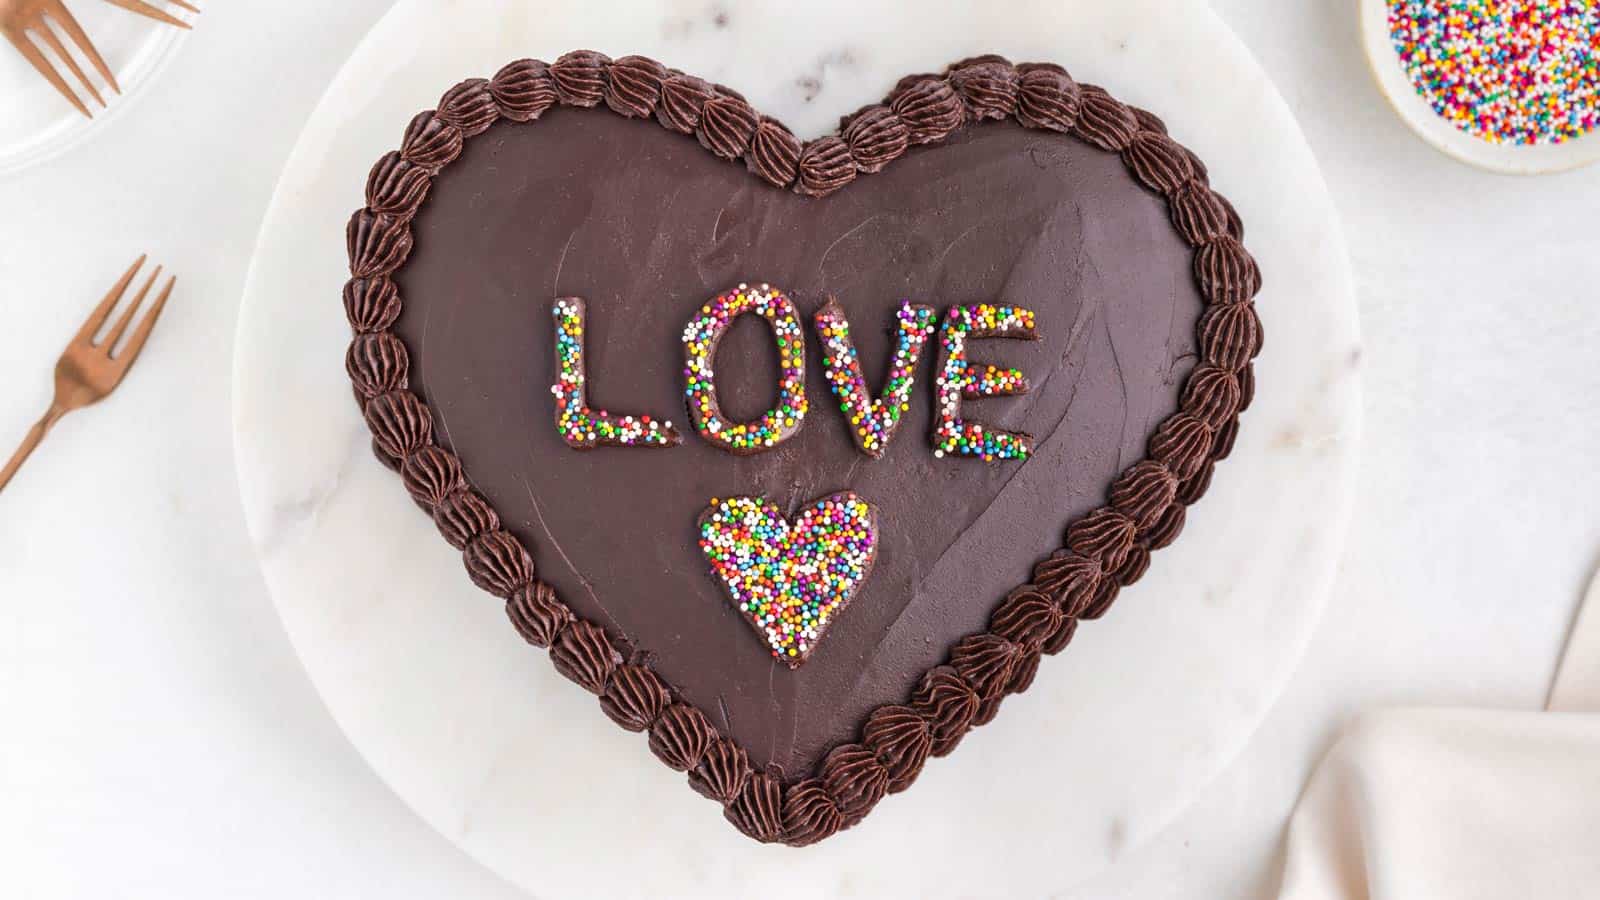 A chocolate cake in the shape of a heart with the word 